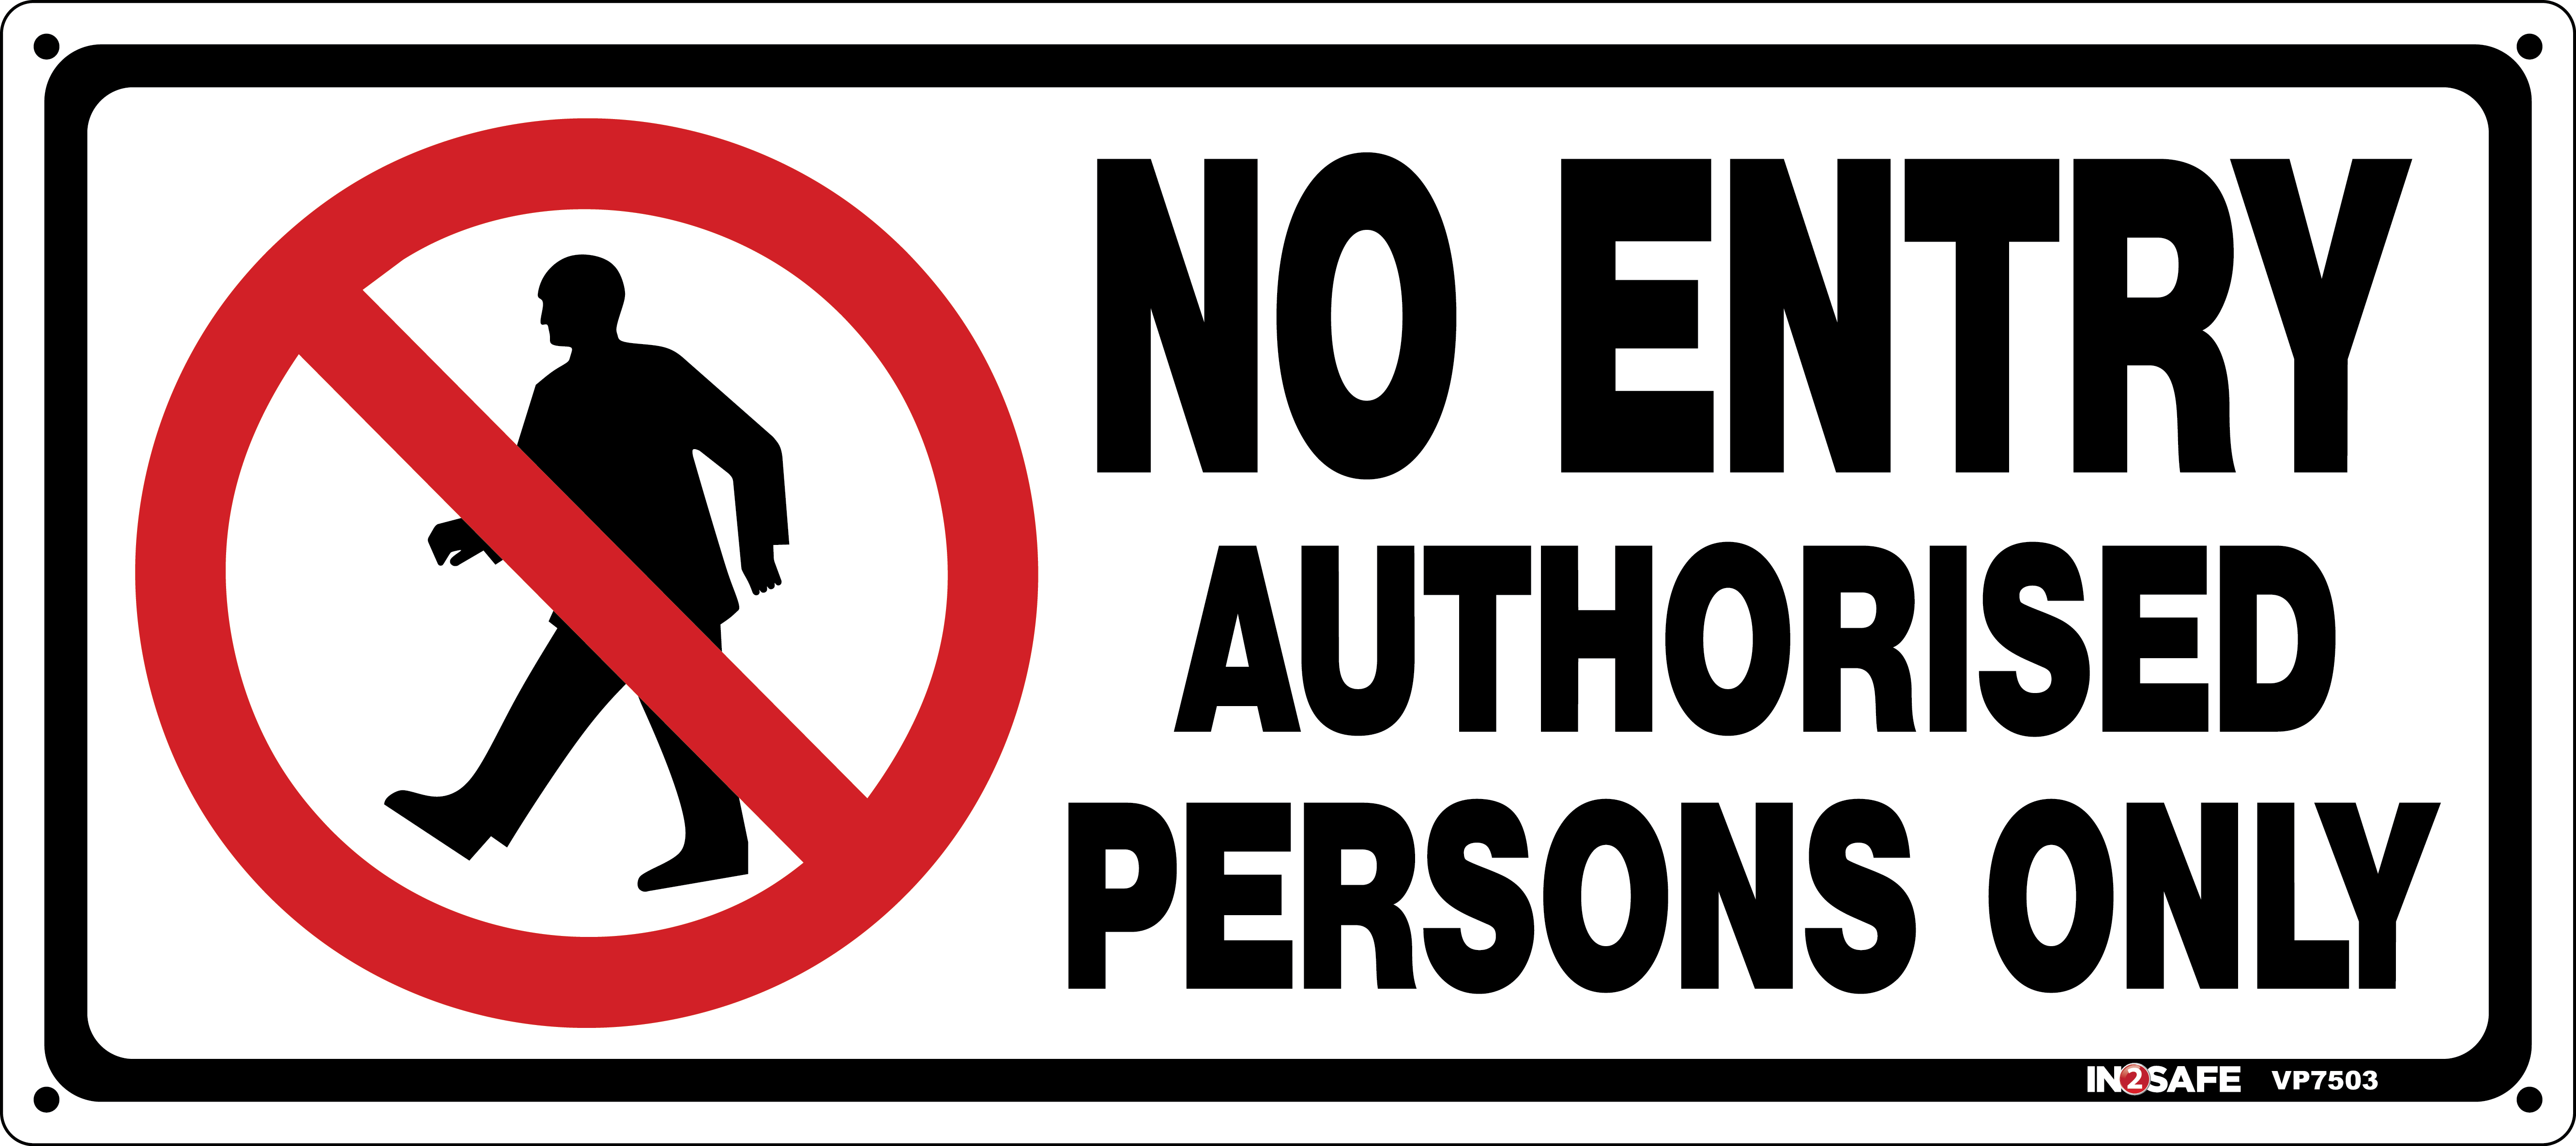 Download Free photo: NO ENTRY - Arched, Marketing, University - Free Download - Jooinn